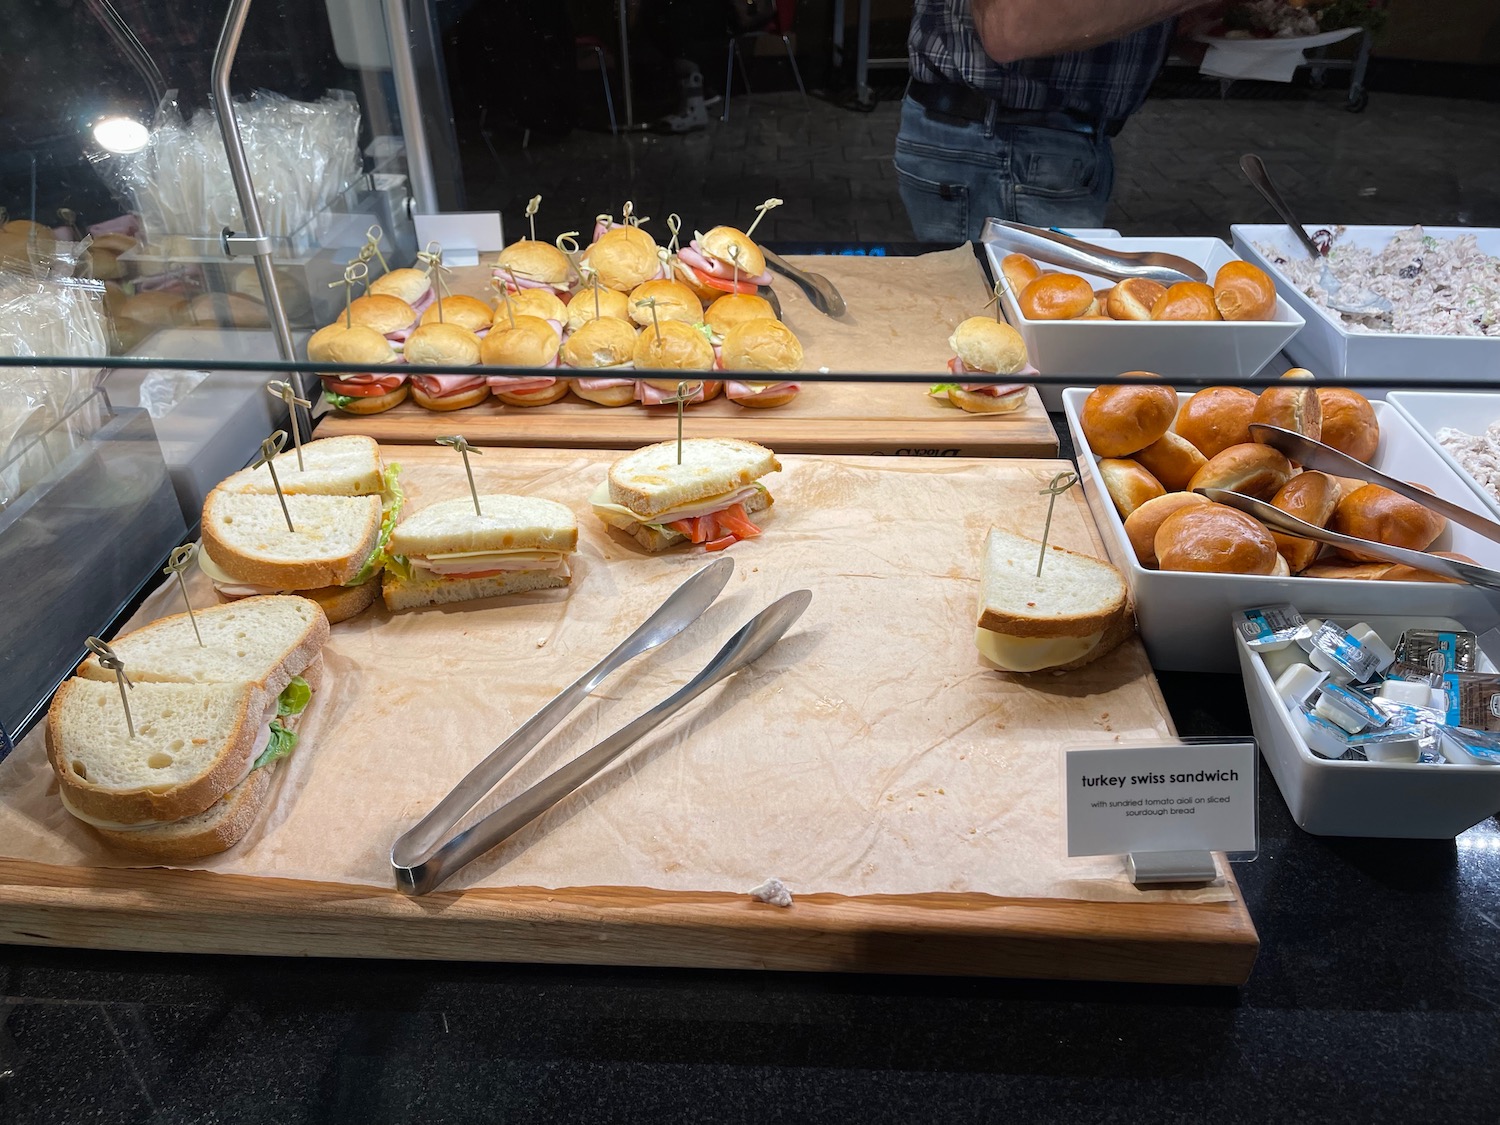 a tray of sandwiches and other food on a table